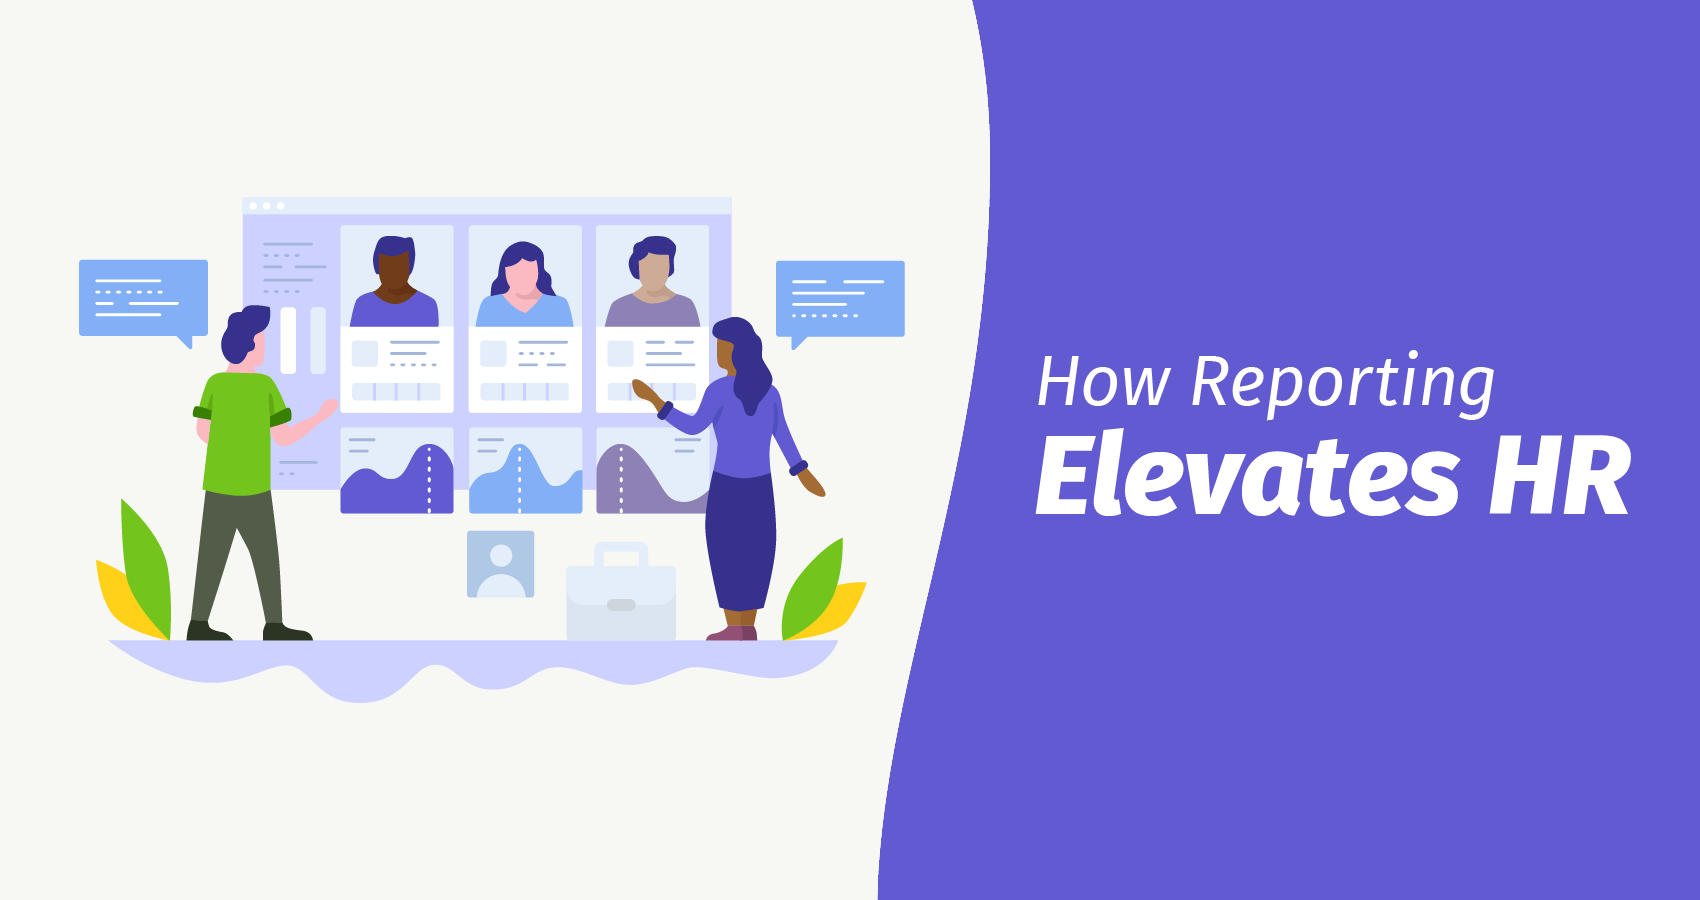 How Reporting Elevates HR